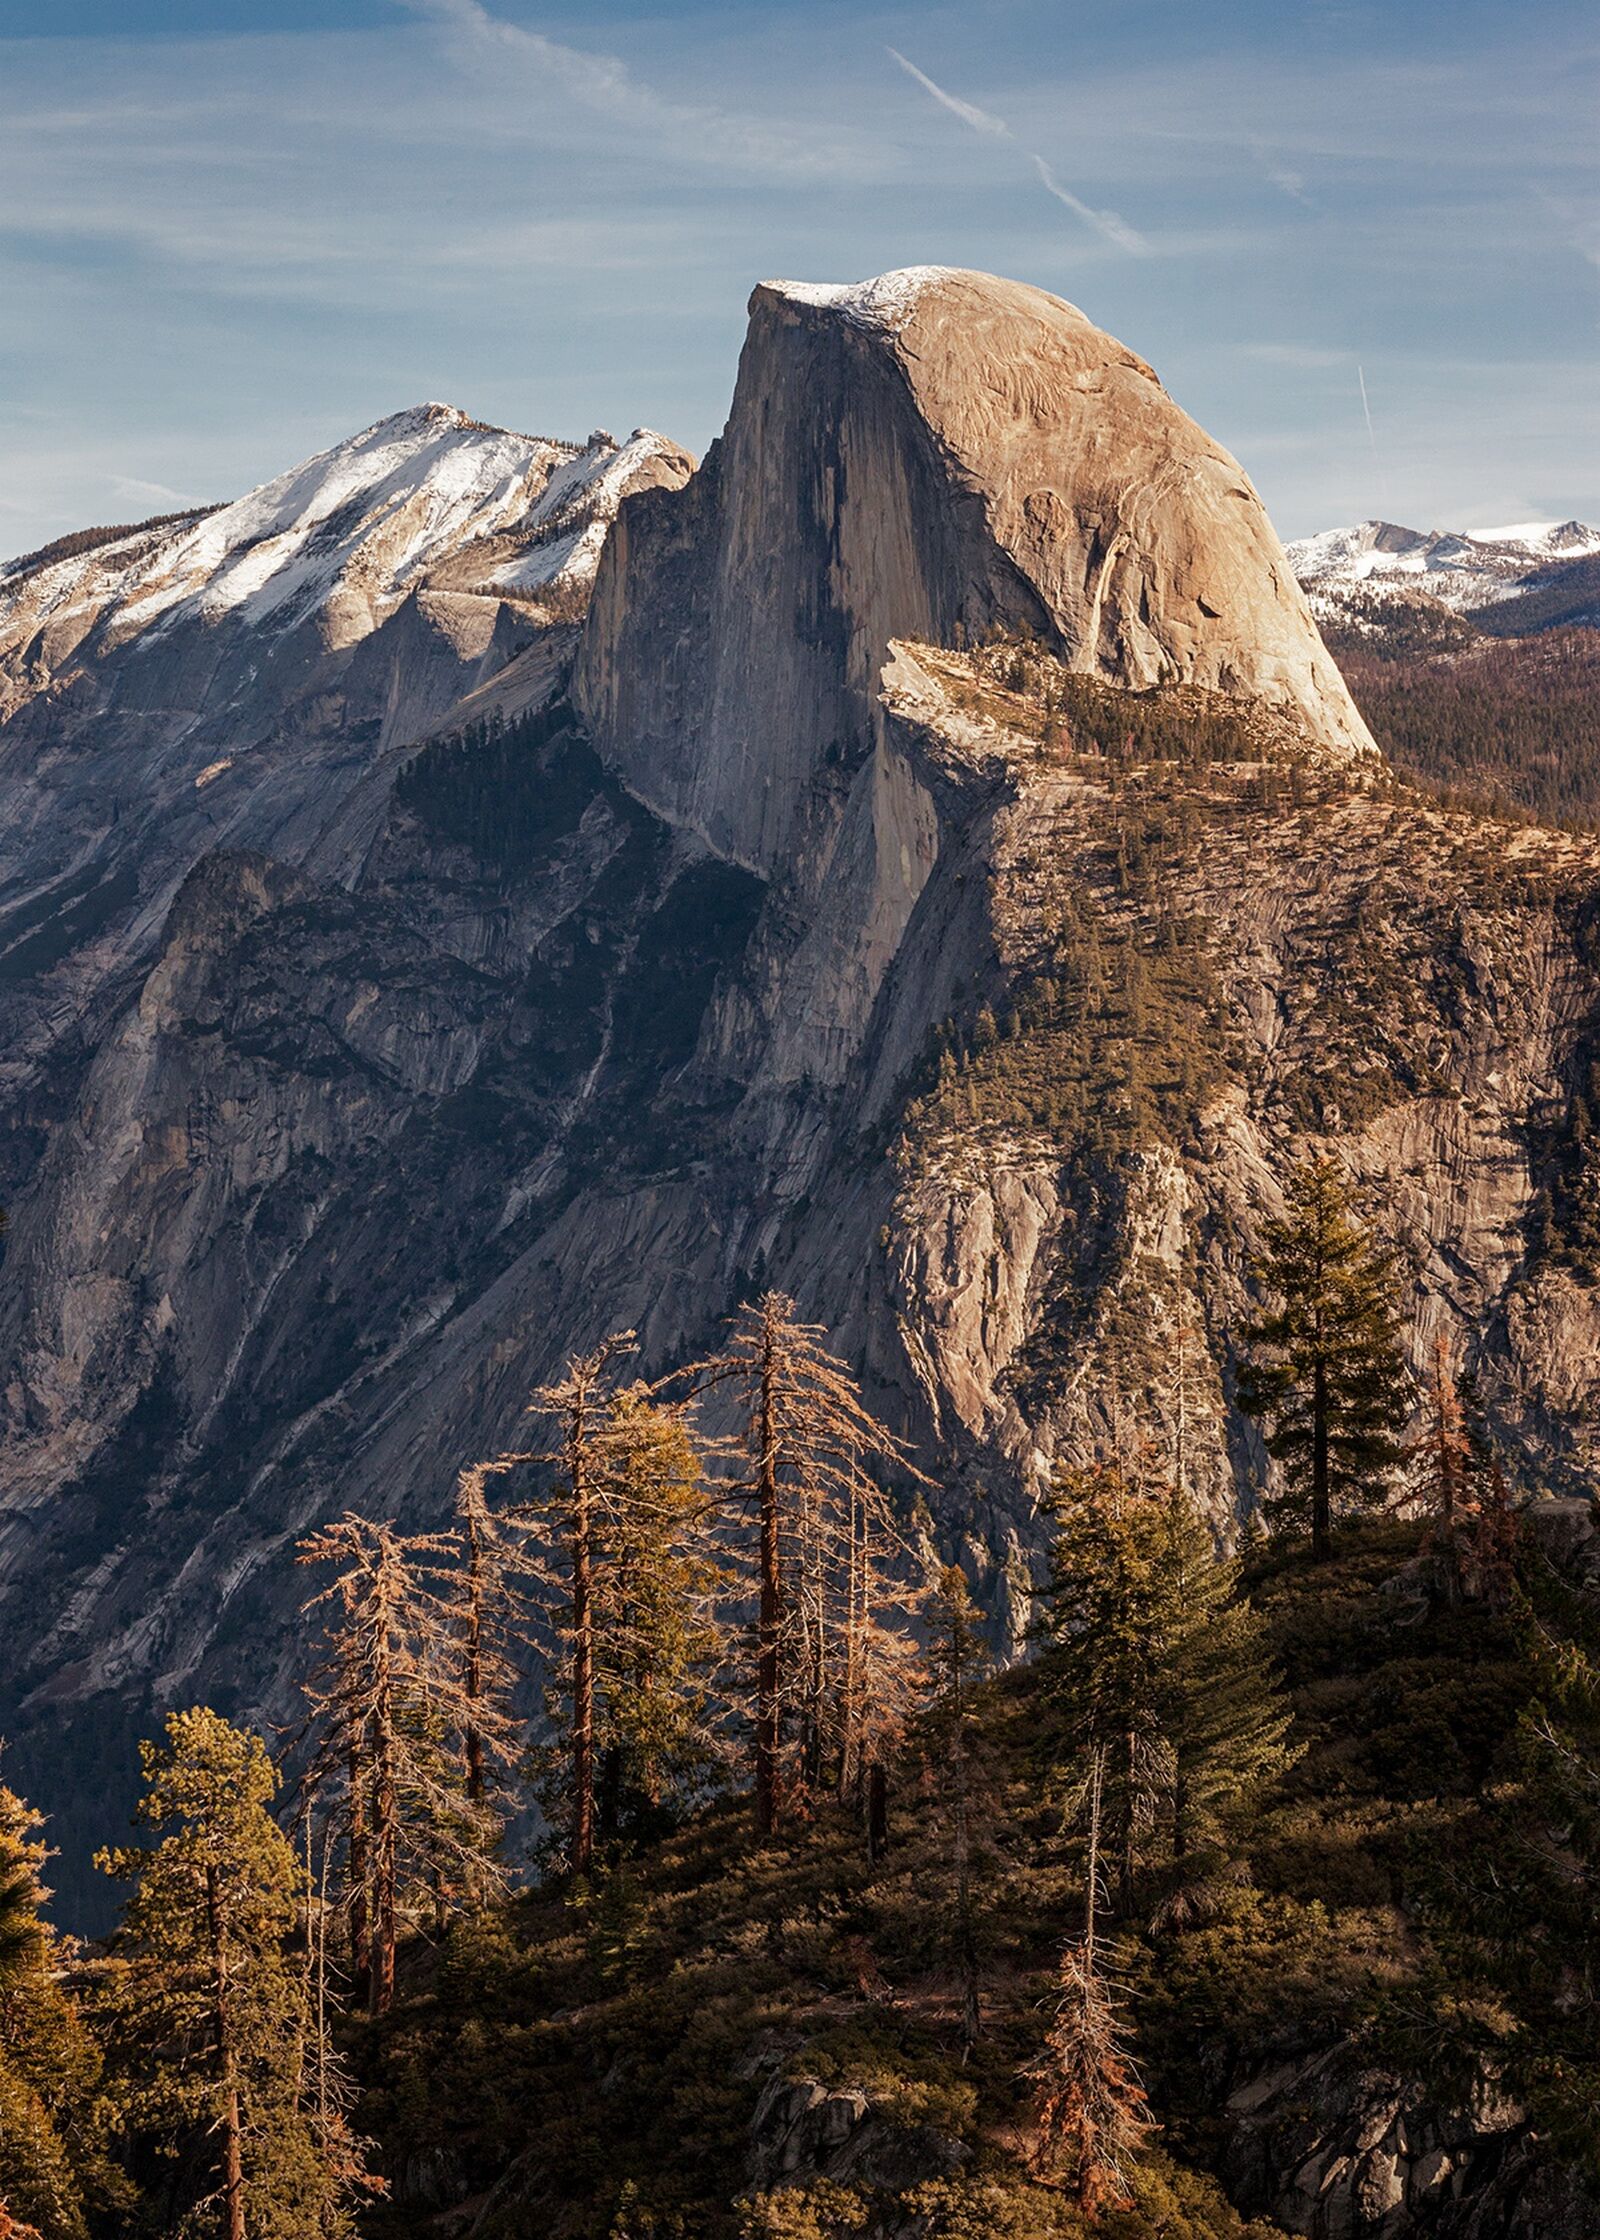 A profile landscape view of Half Dome with snow on top in Yosemite National Park, California